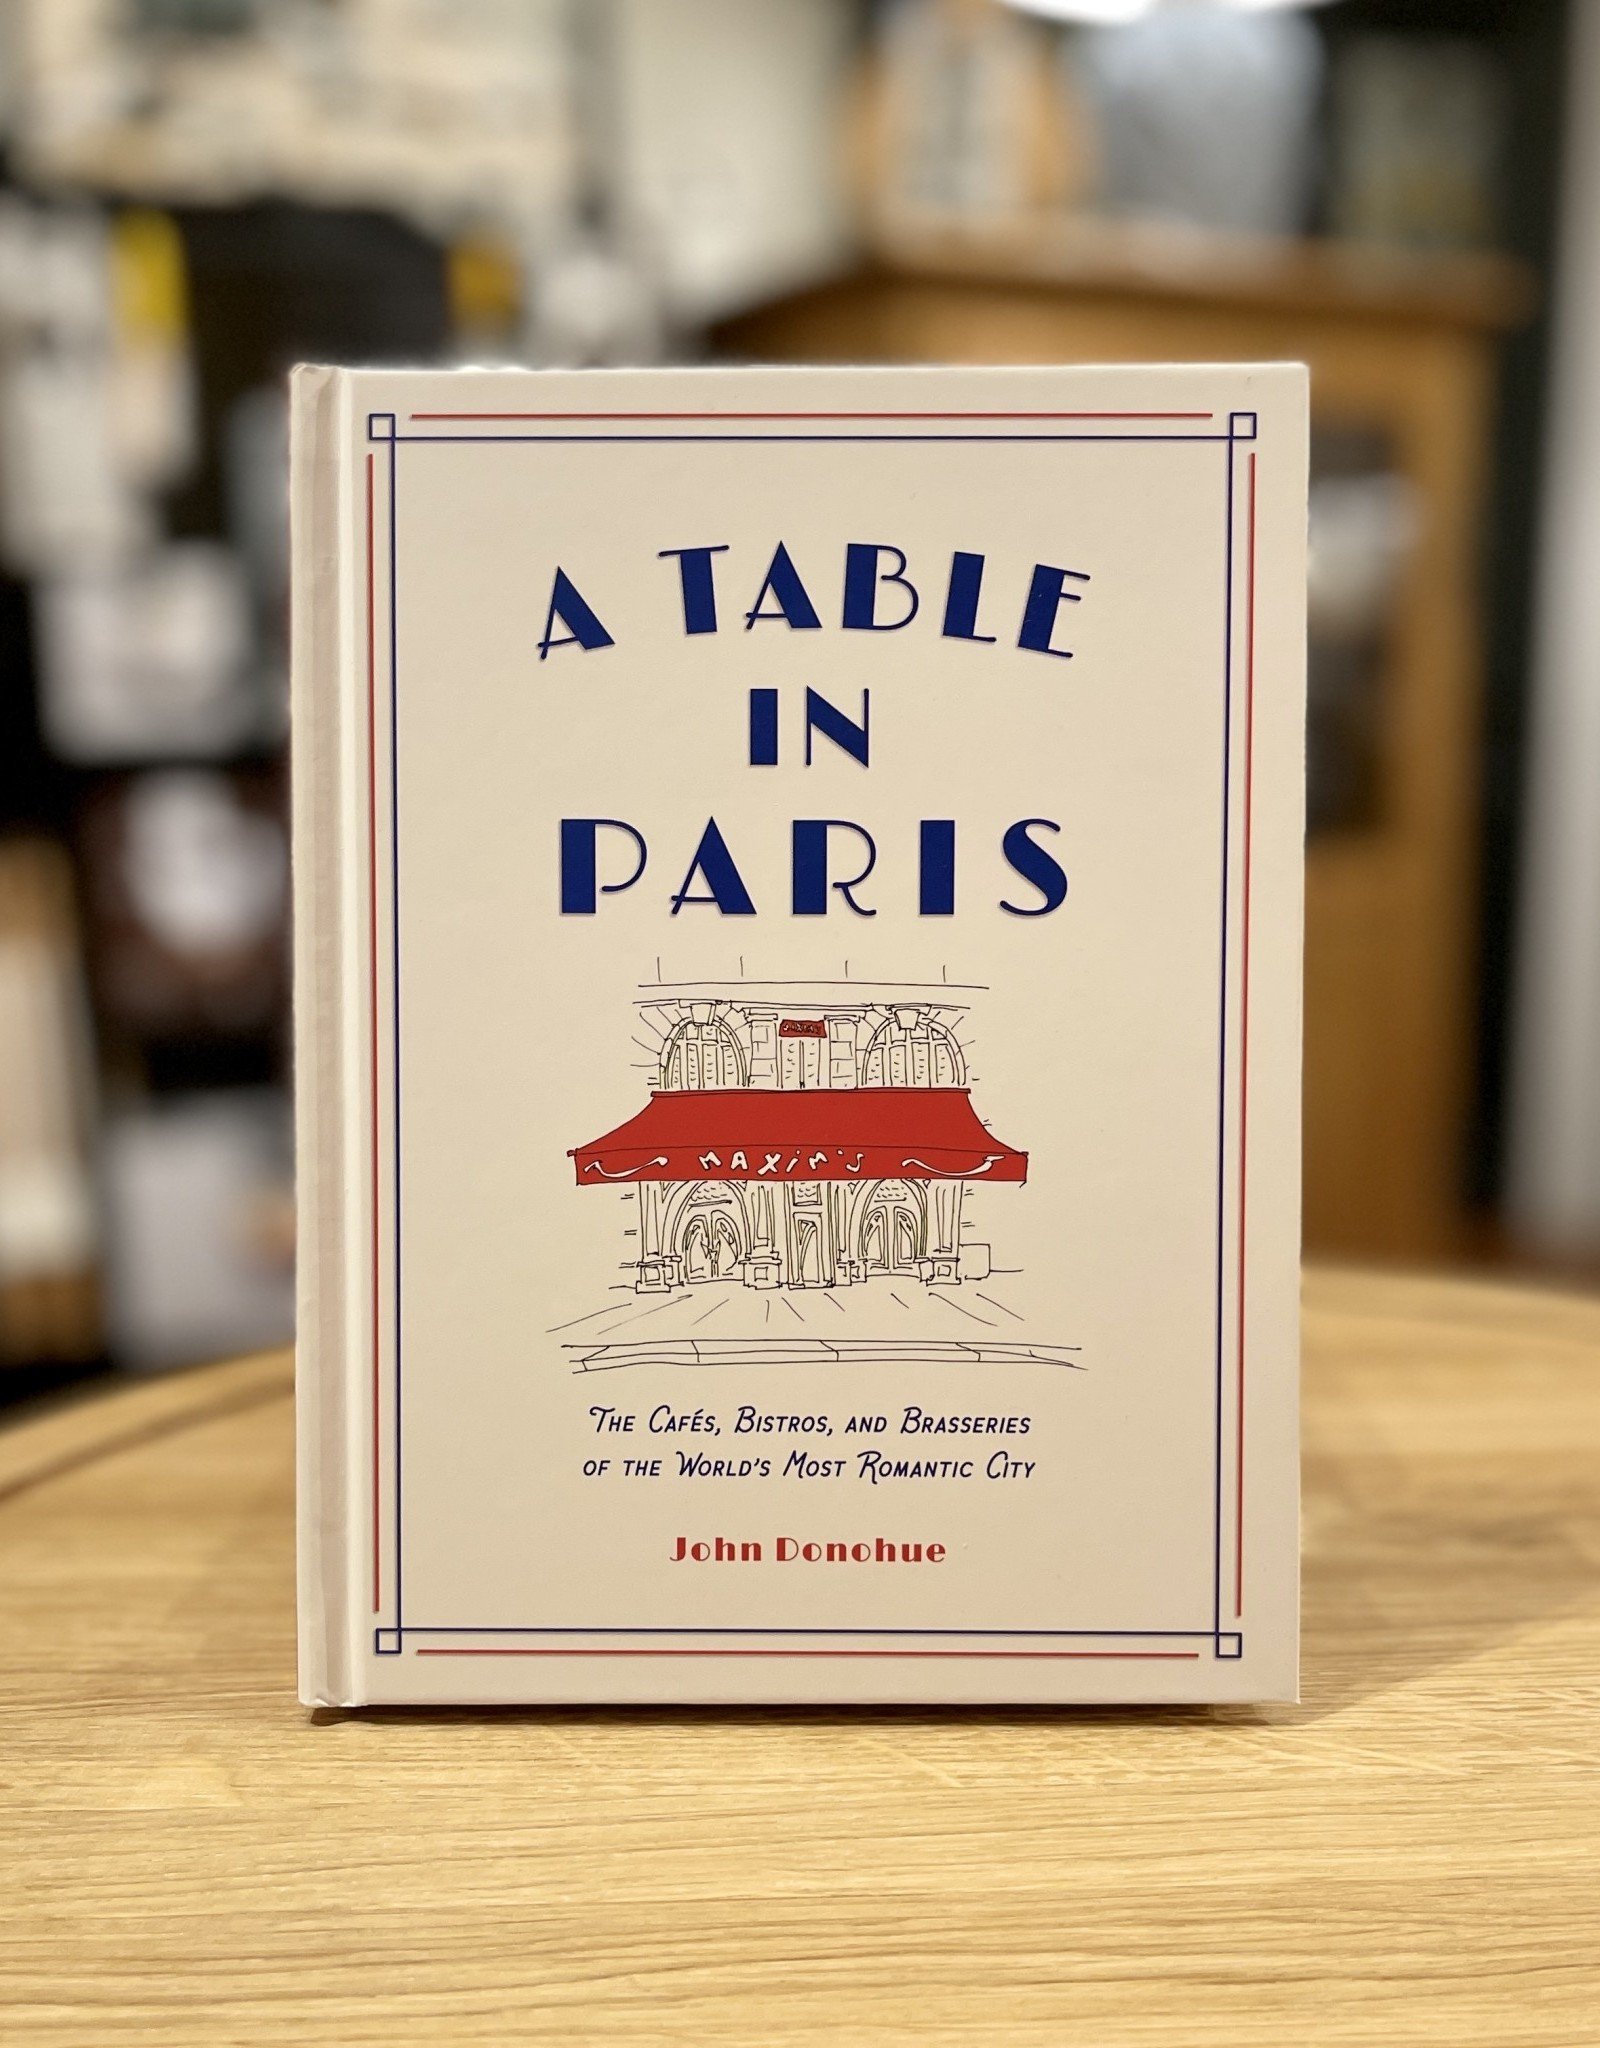 A Table in Paris - The Cafés, Bistros, and Brasseries of the World’s Most Romantic City - By John Donohue